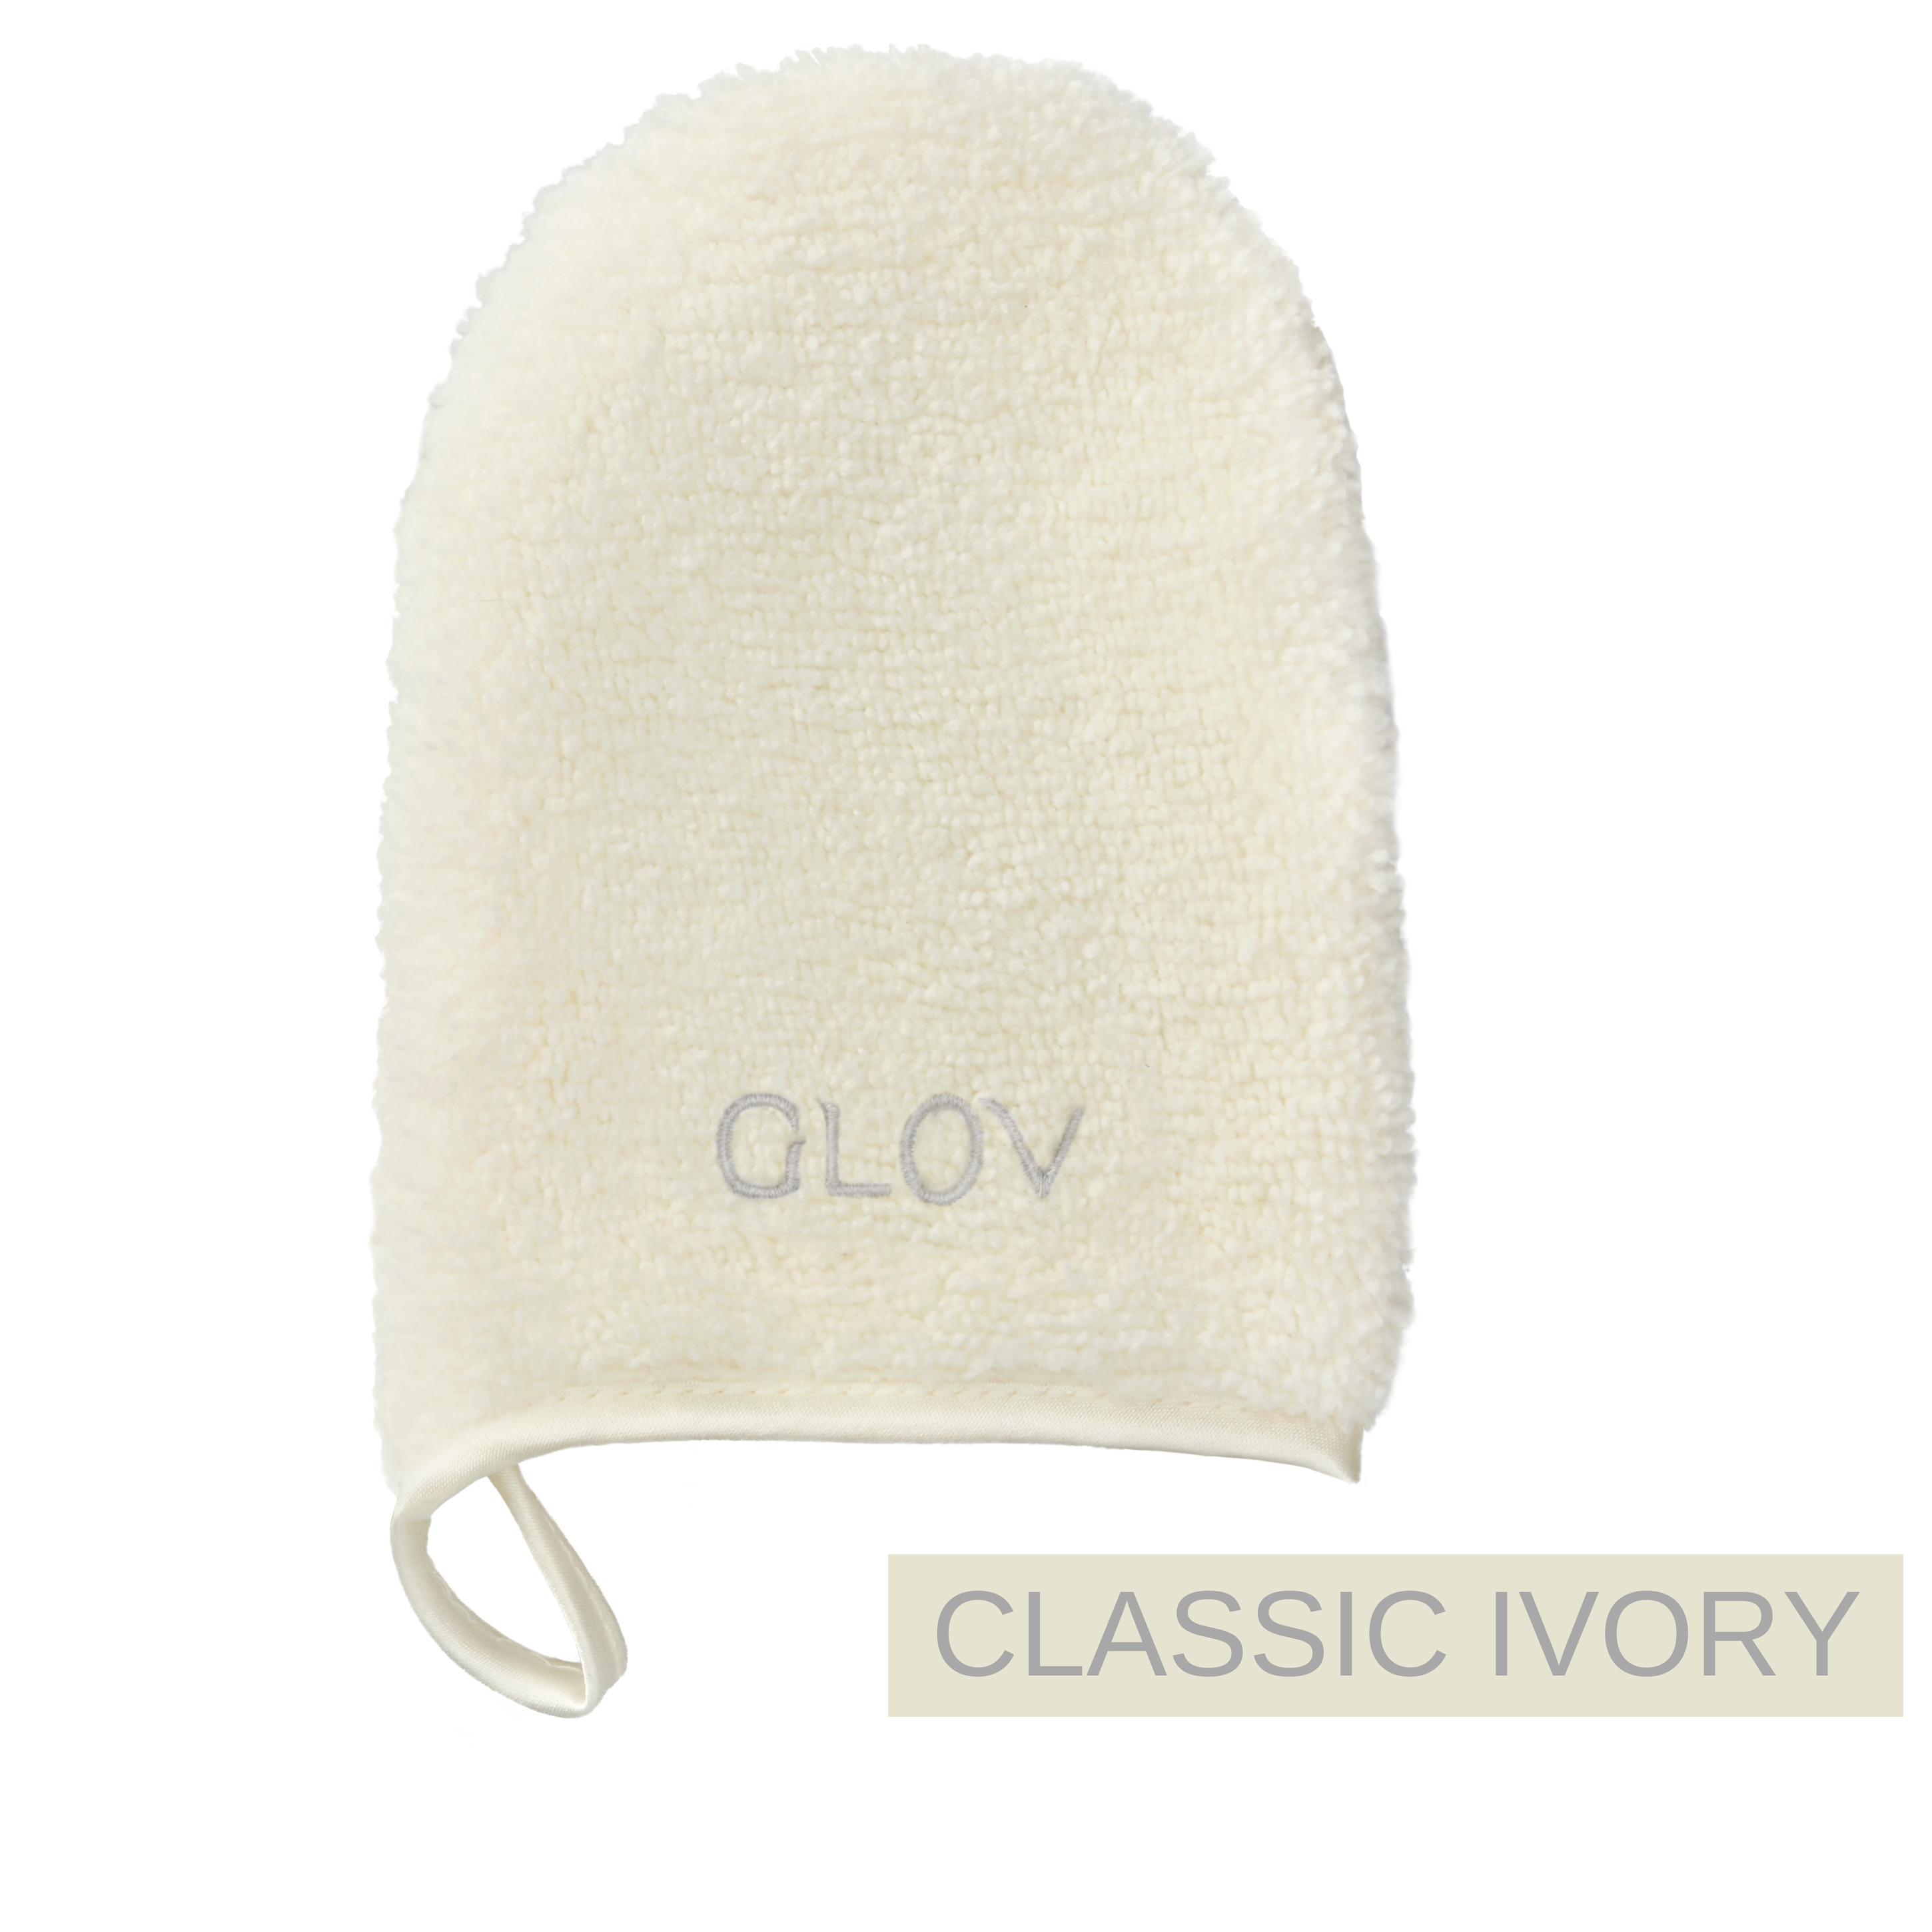 02. GLOV On-The-Go Classic Ivory